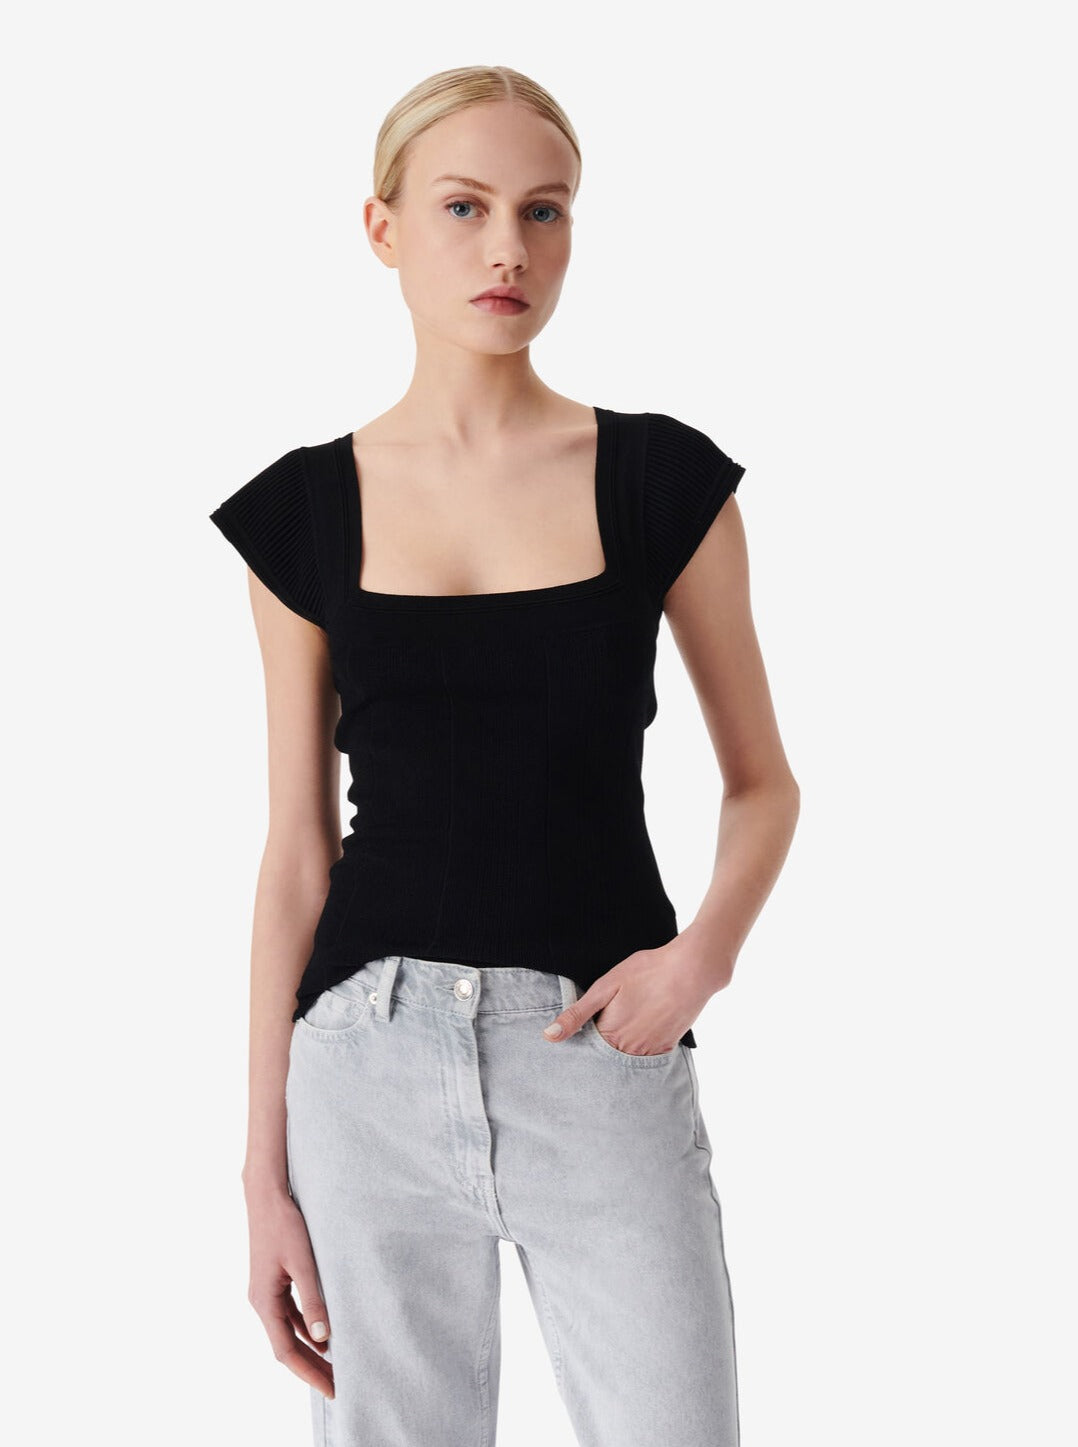 COLPA knitted top, black